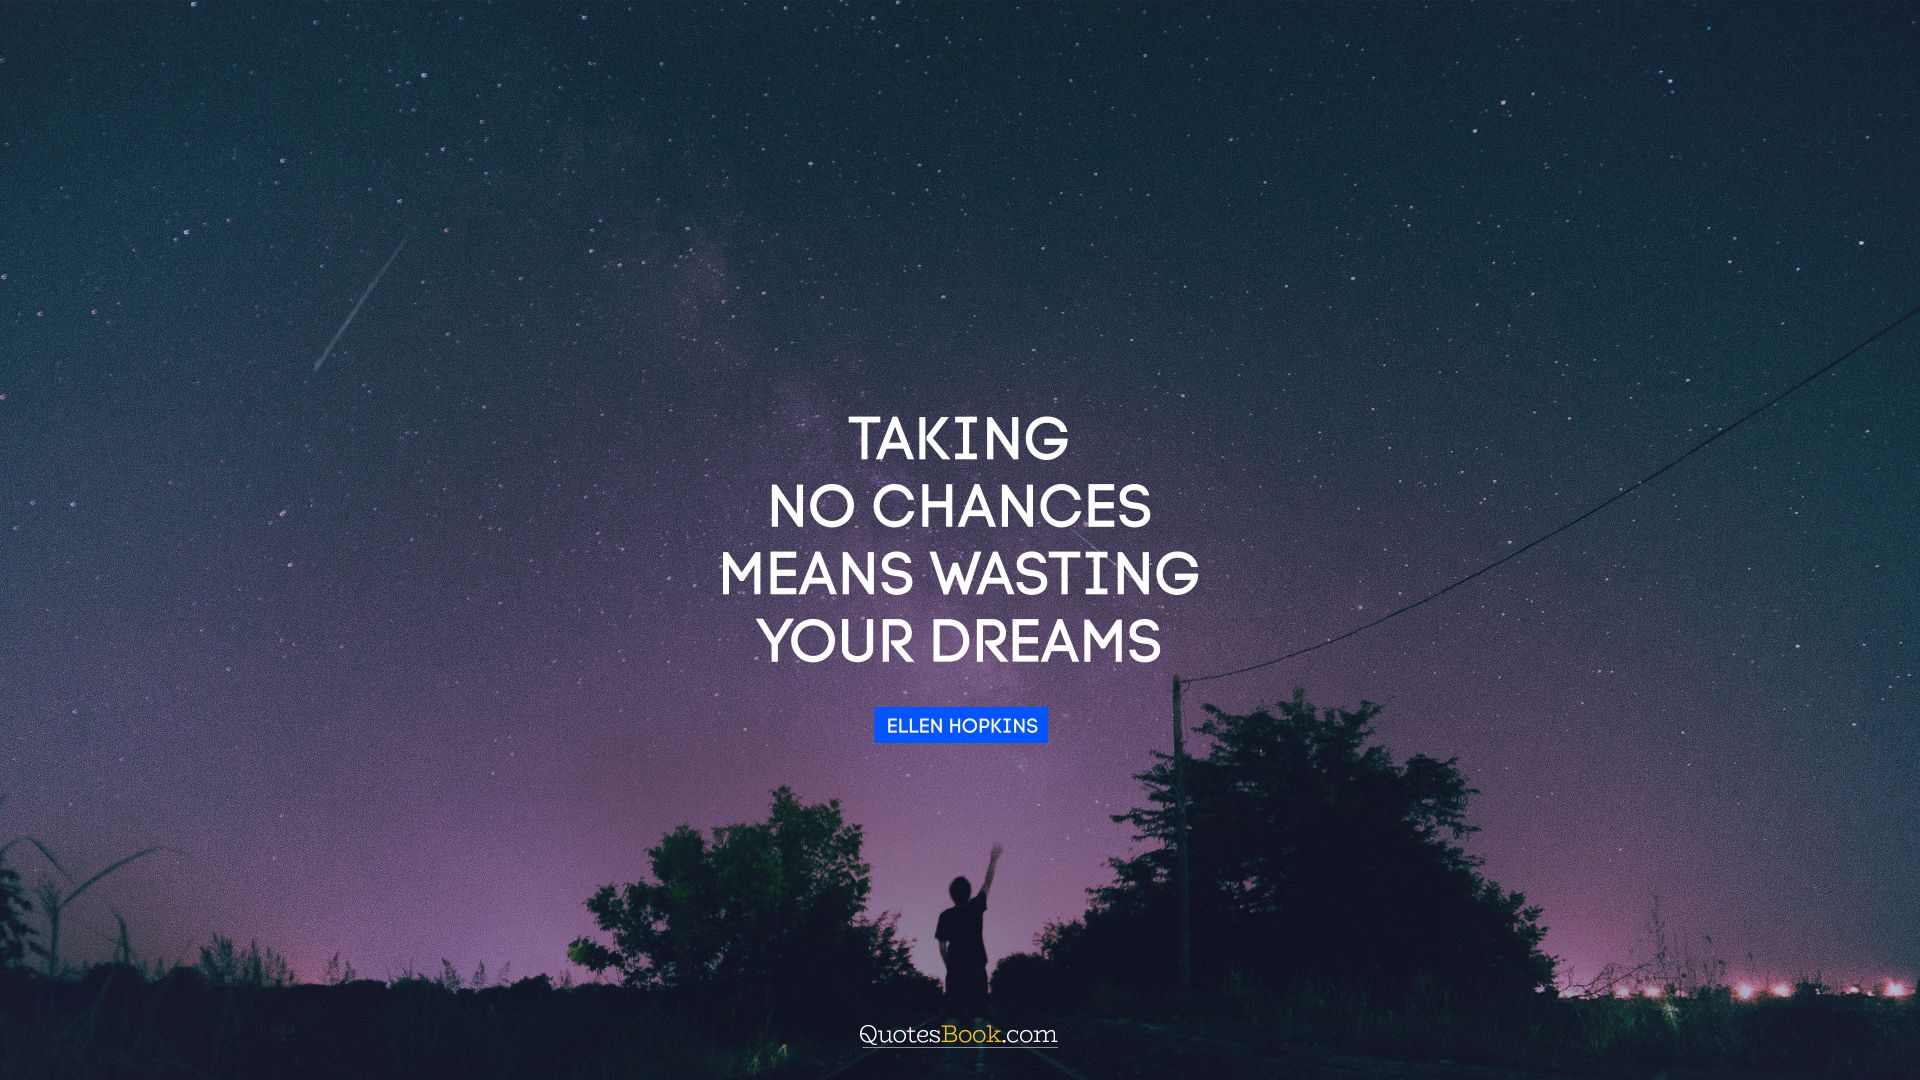 Taking no chances means wasting your dreams. - Quote by Ellen Hopkins